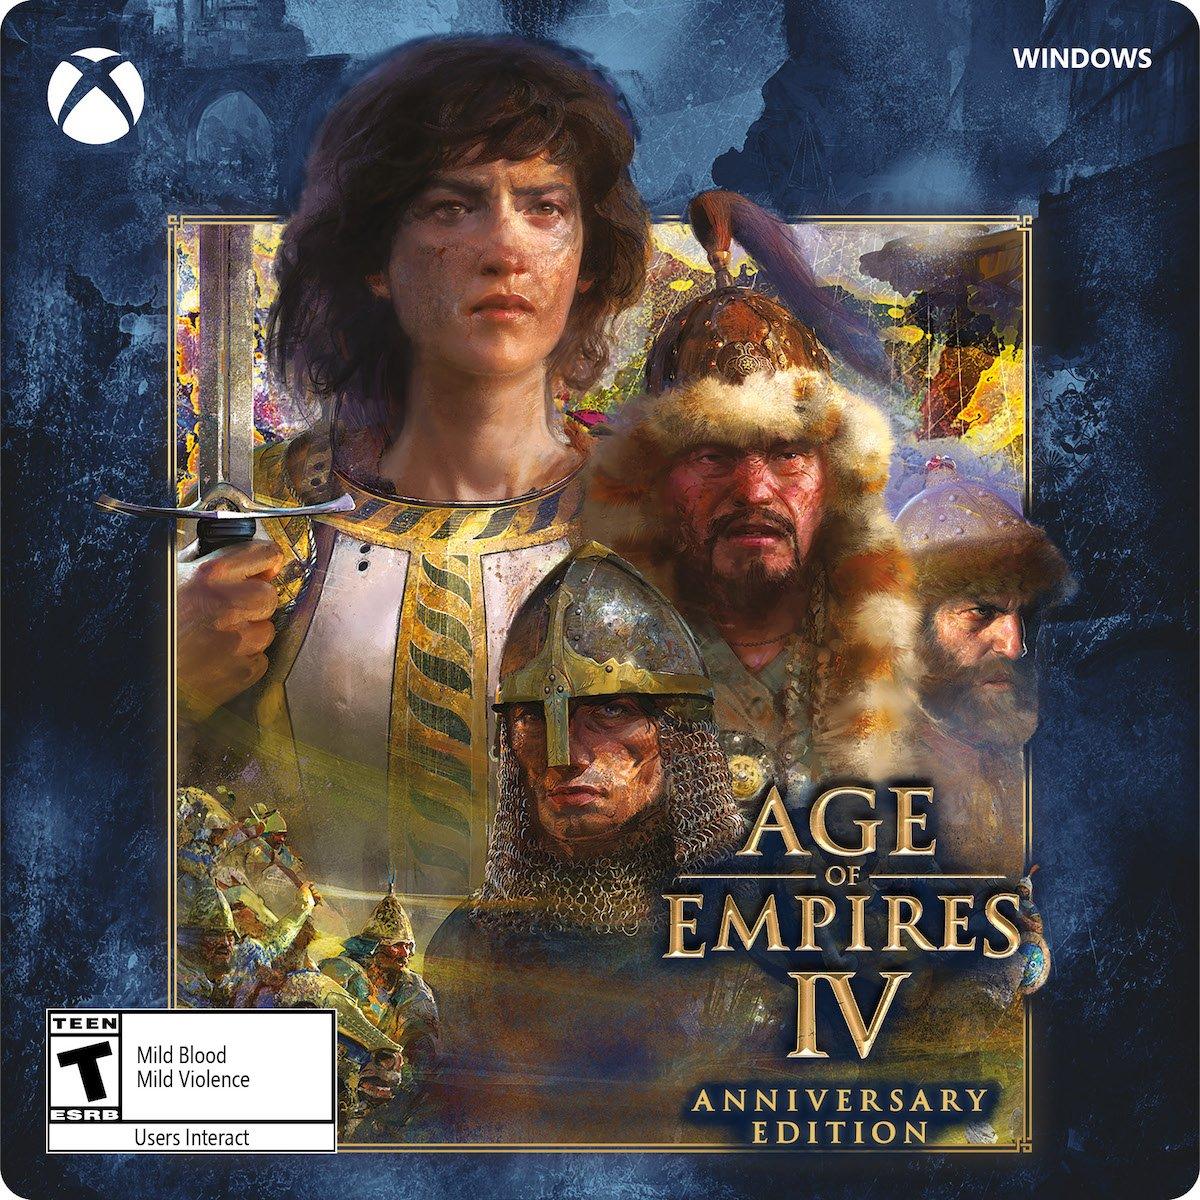 Age of Empires IV Anniversary